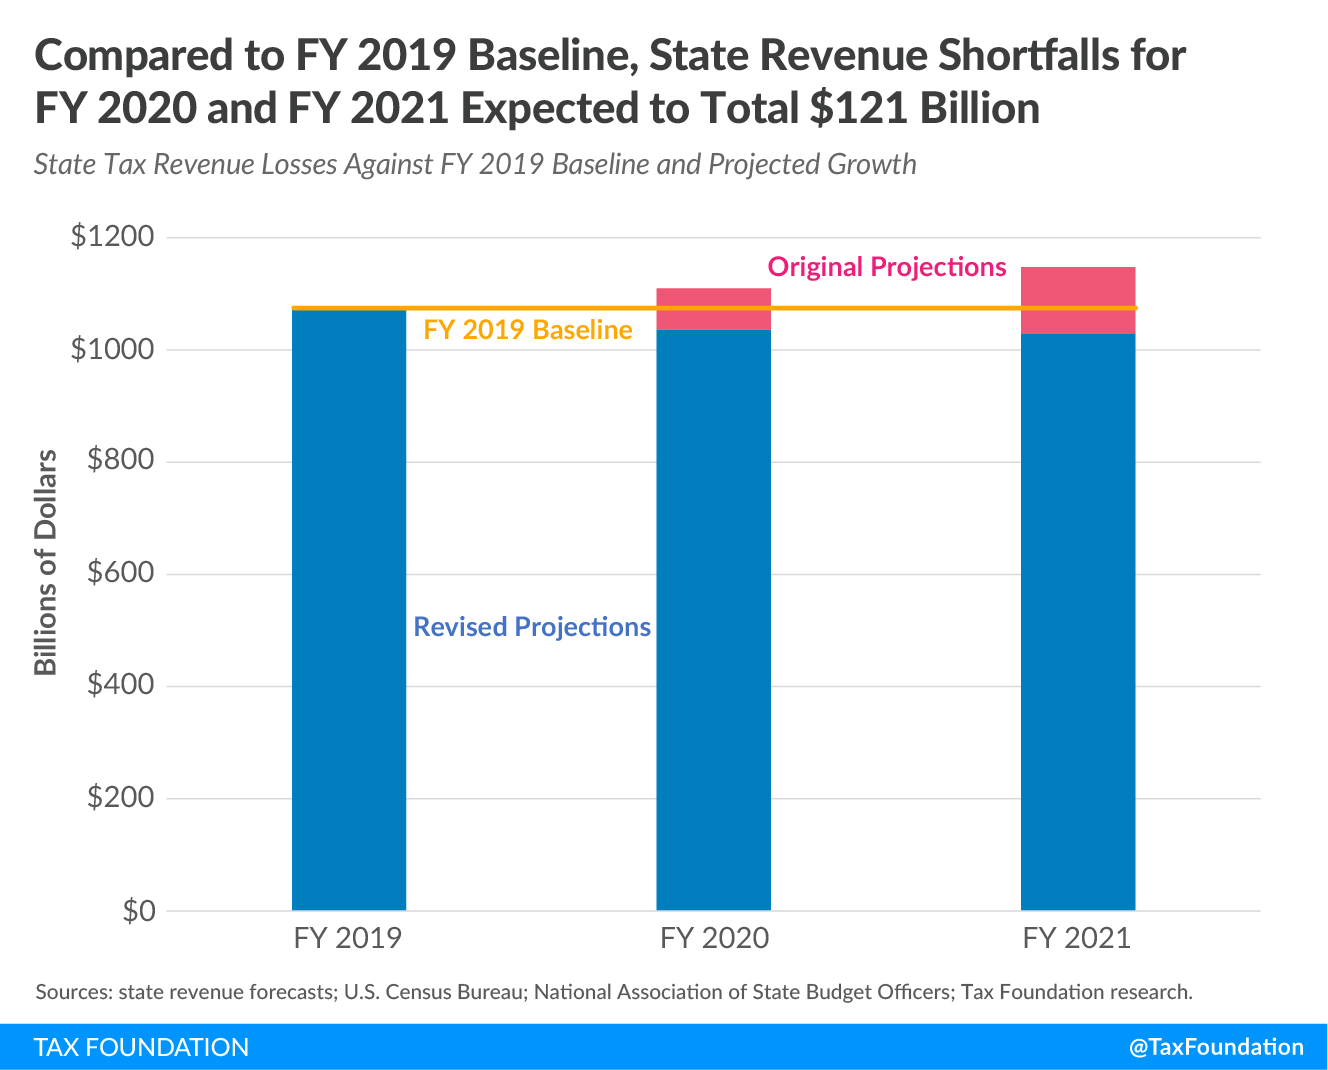 state revenue forecasts, state budget forecasts, projected state revenue losses